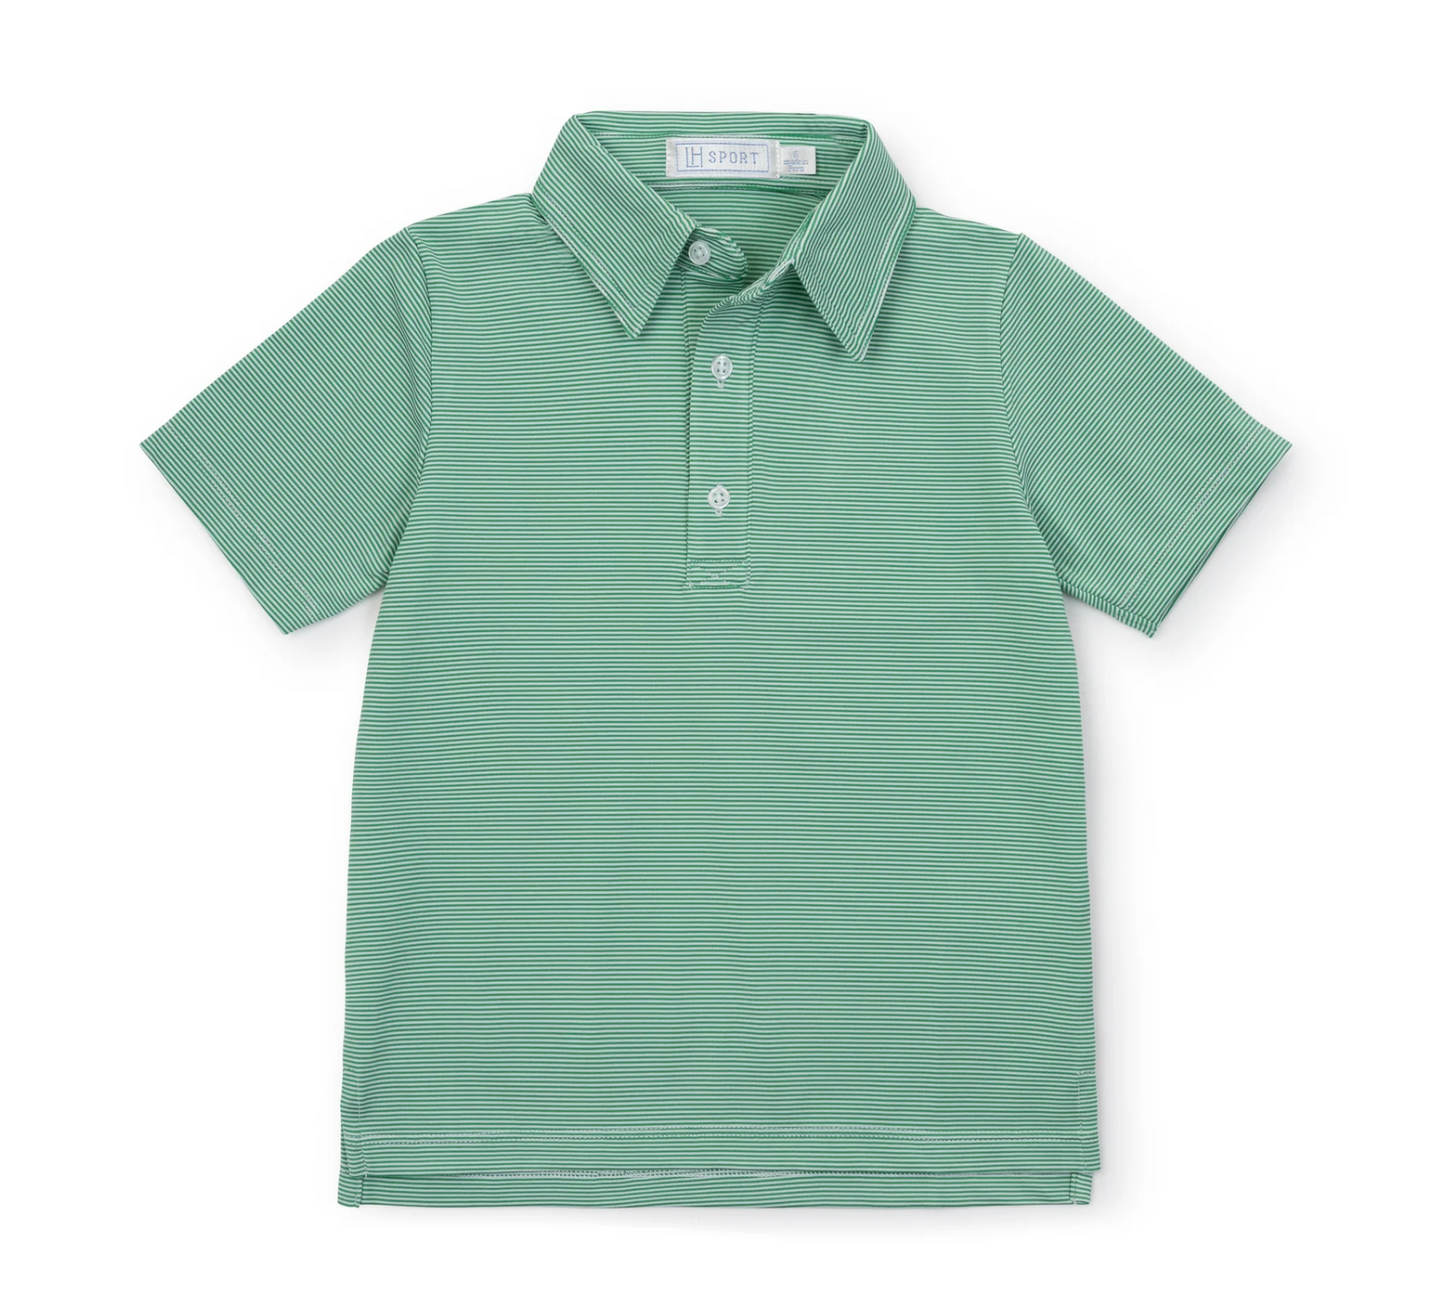 Performance Polo - Green and White Stripe